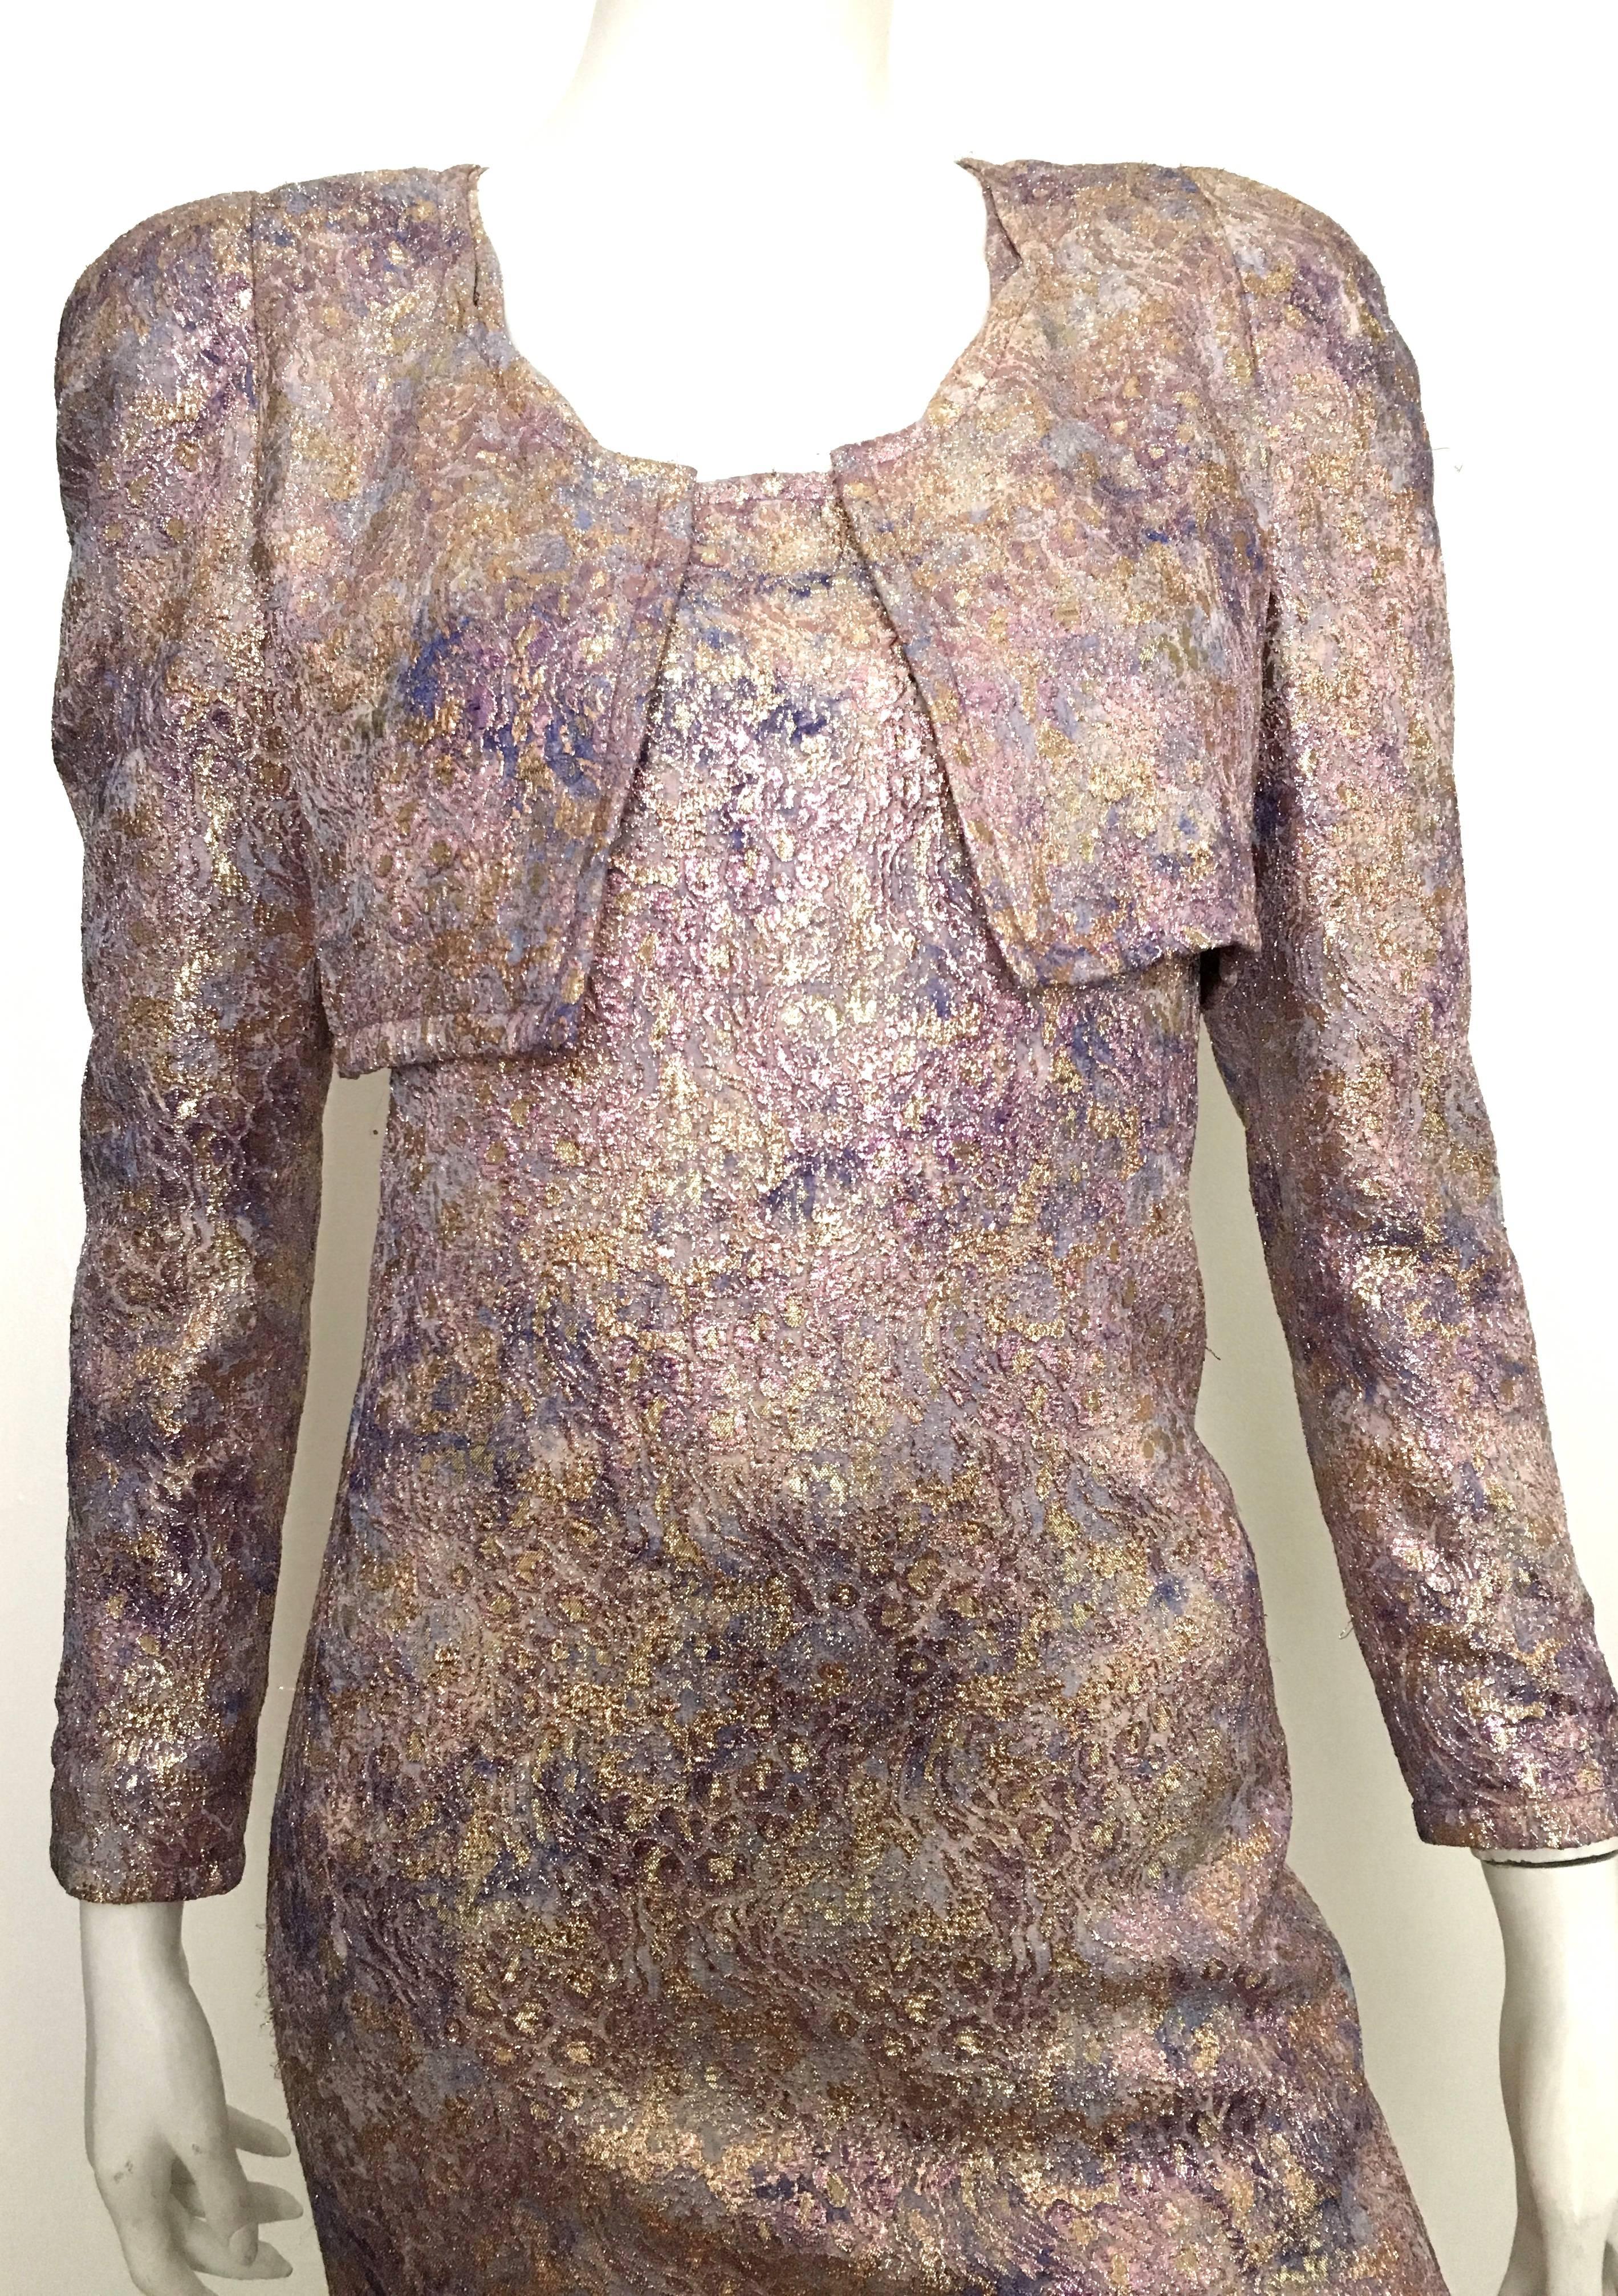 Carolina Herrera 1980s original sample holographic metallic lame evening cocktail dress with matching cropped jacket is a size 6.  Ladies please use your measuring tape so you can properly measure your bust, waist & hips to make certain this